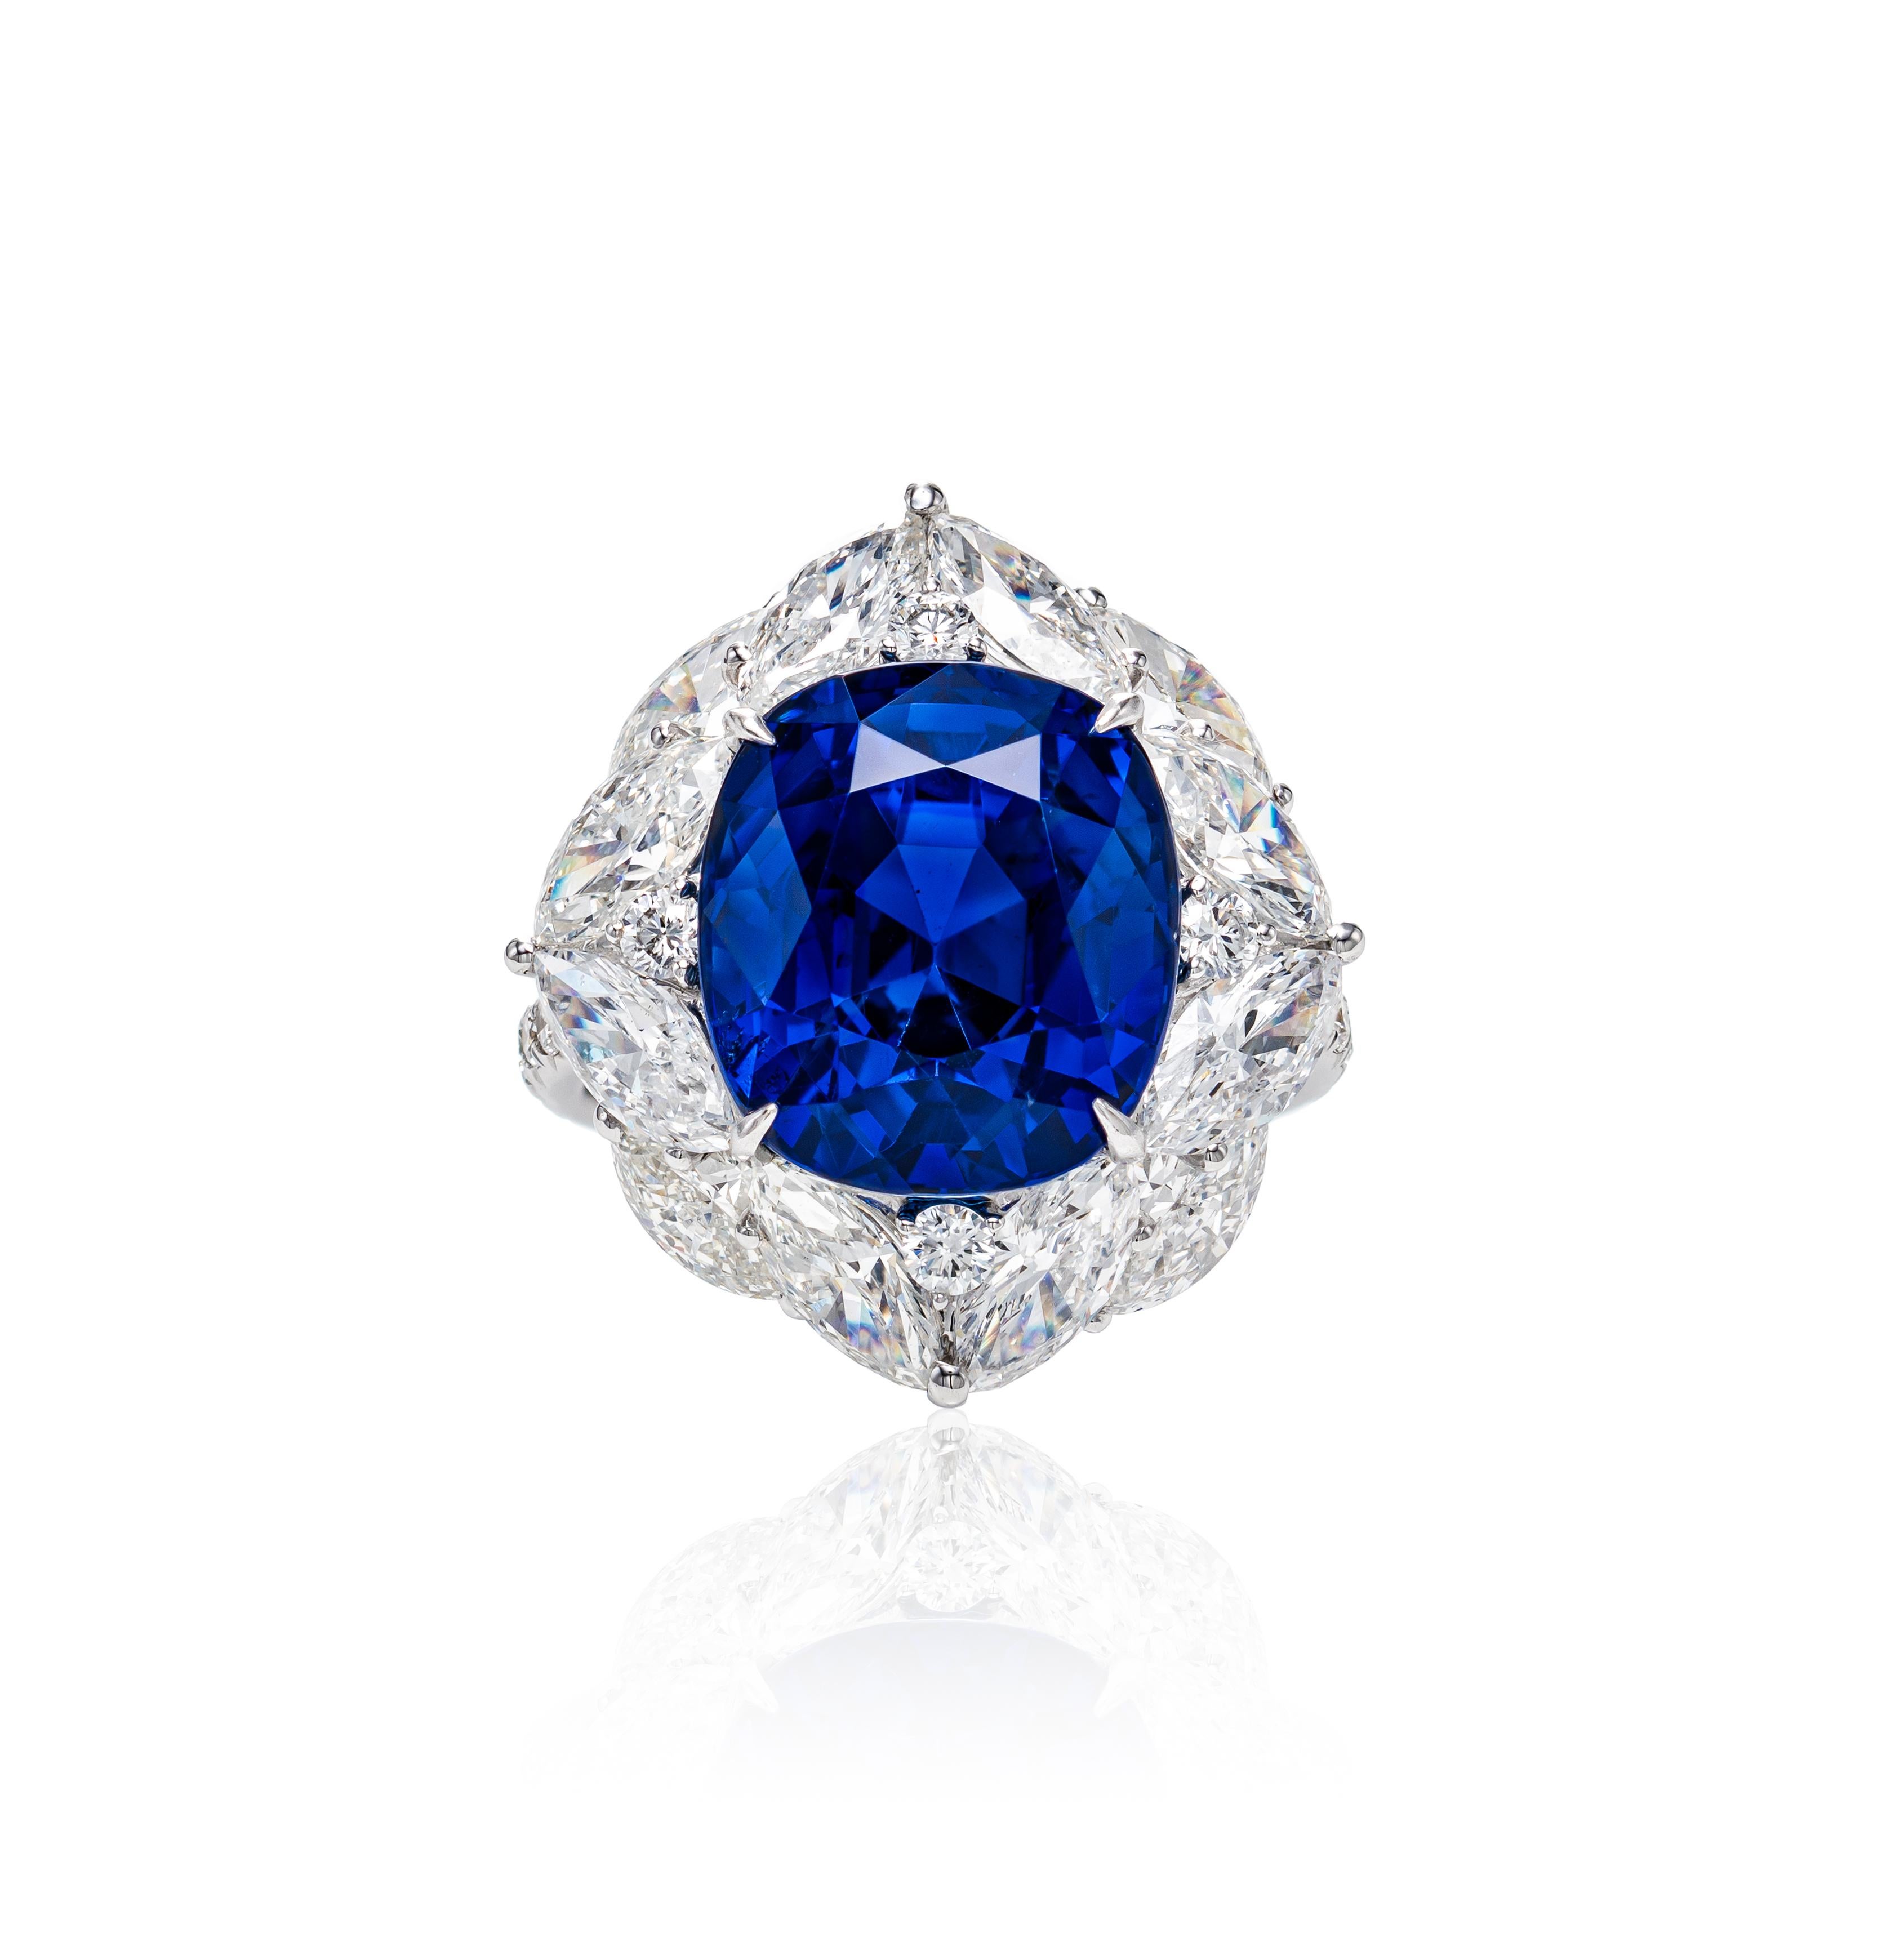 Cushion Cut 15.35 Carat Royal Blue Sapphire and Diamond Ring in 18k White Gold For Sale